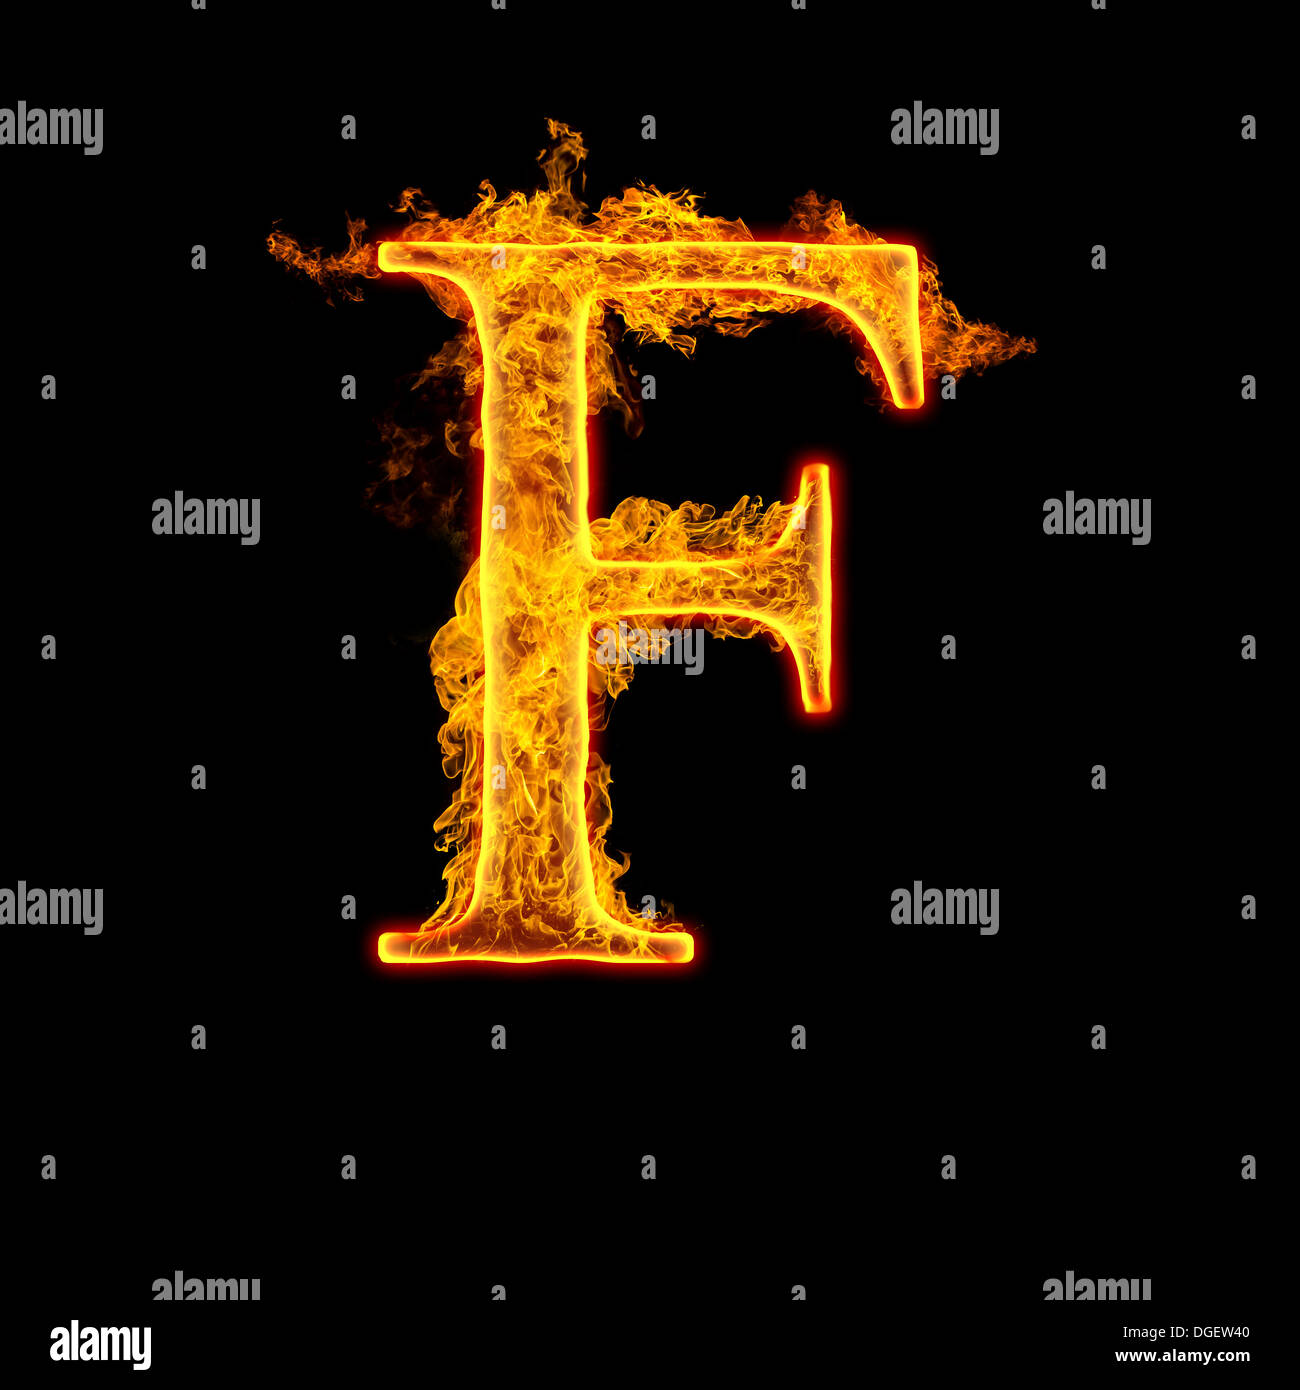 Fire alphabet letter F isolated on black background. Stock Photo